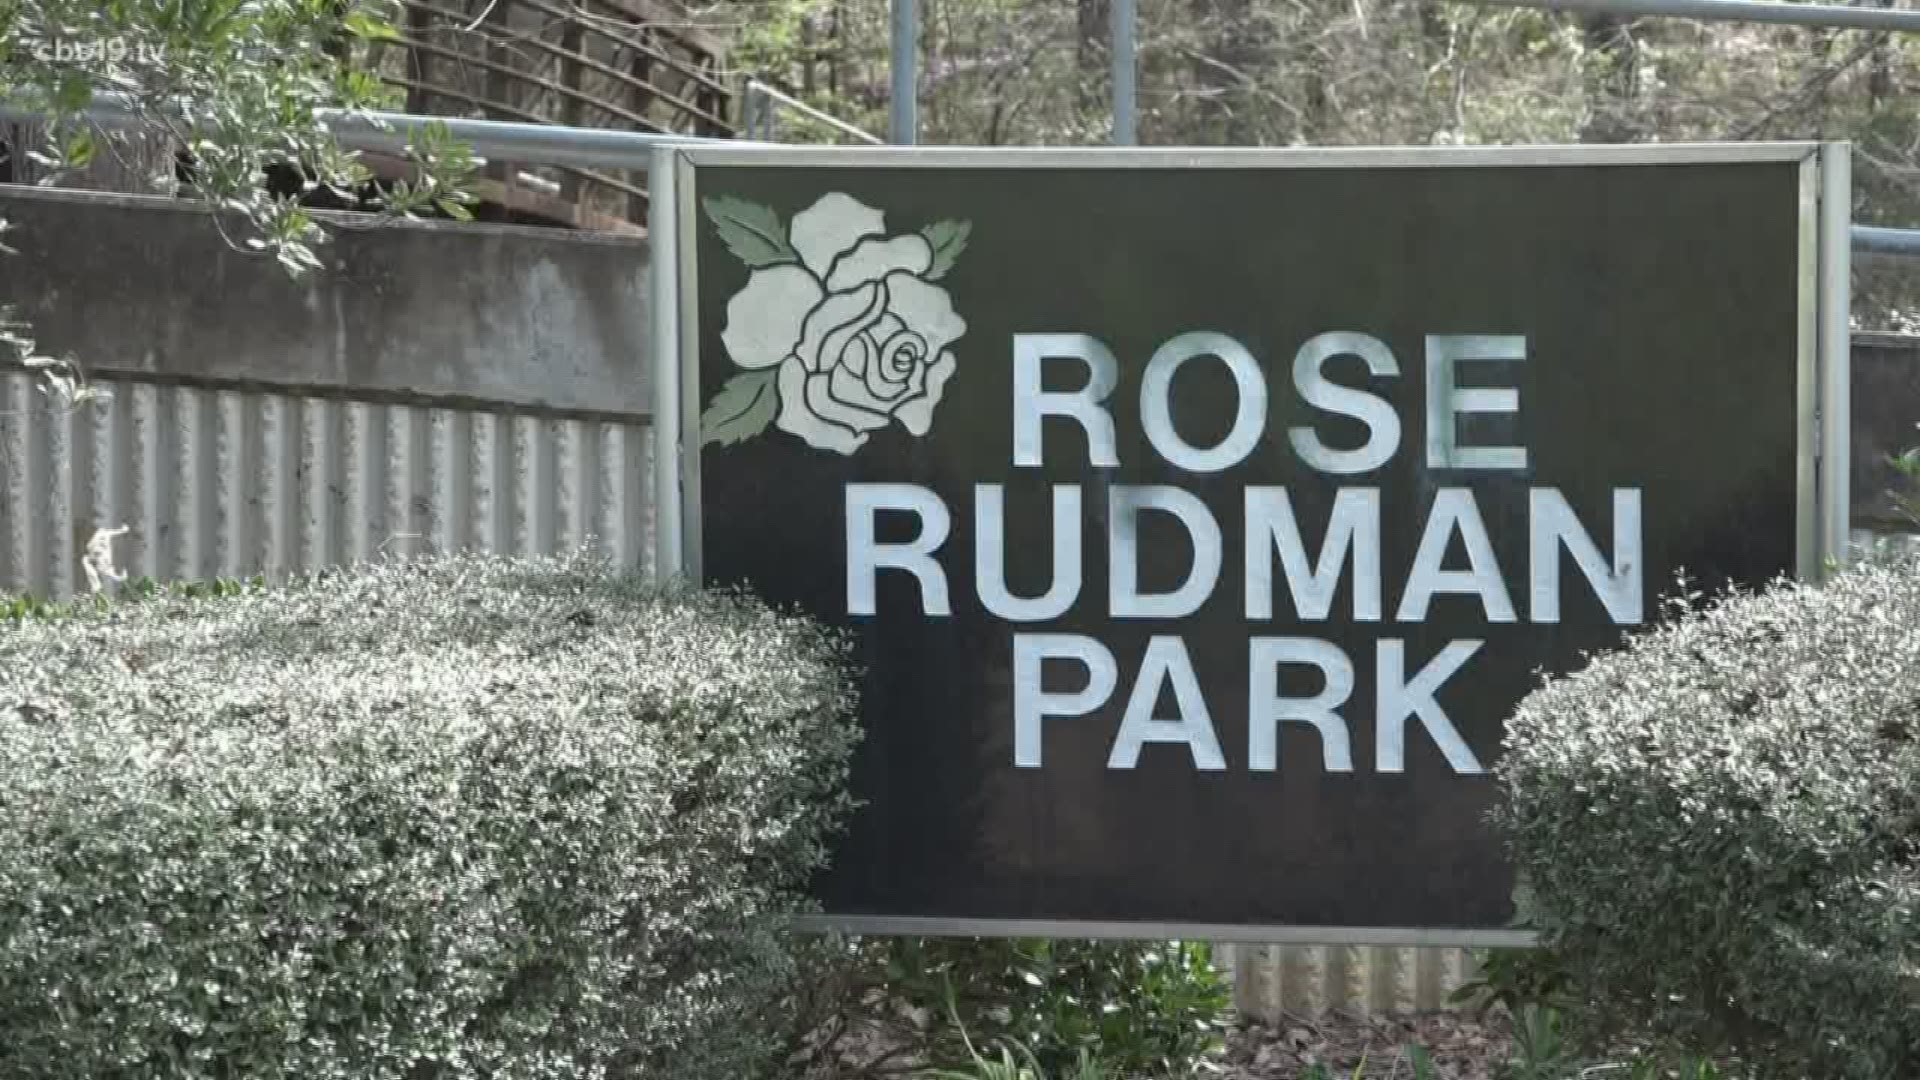 Tyler police say a woman was attacked at Rose Rudman Park Thursday evening. She was able to fight off the suspect, but one woman who helped the victim says what she experienced will take awhile to recover from.